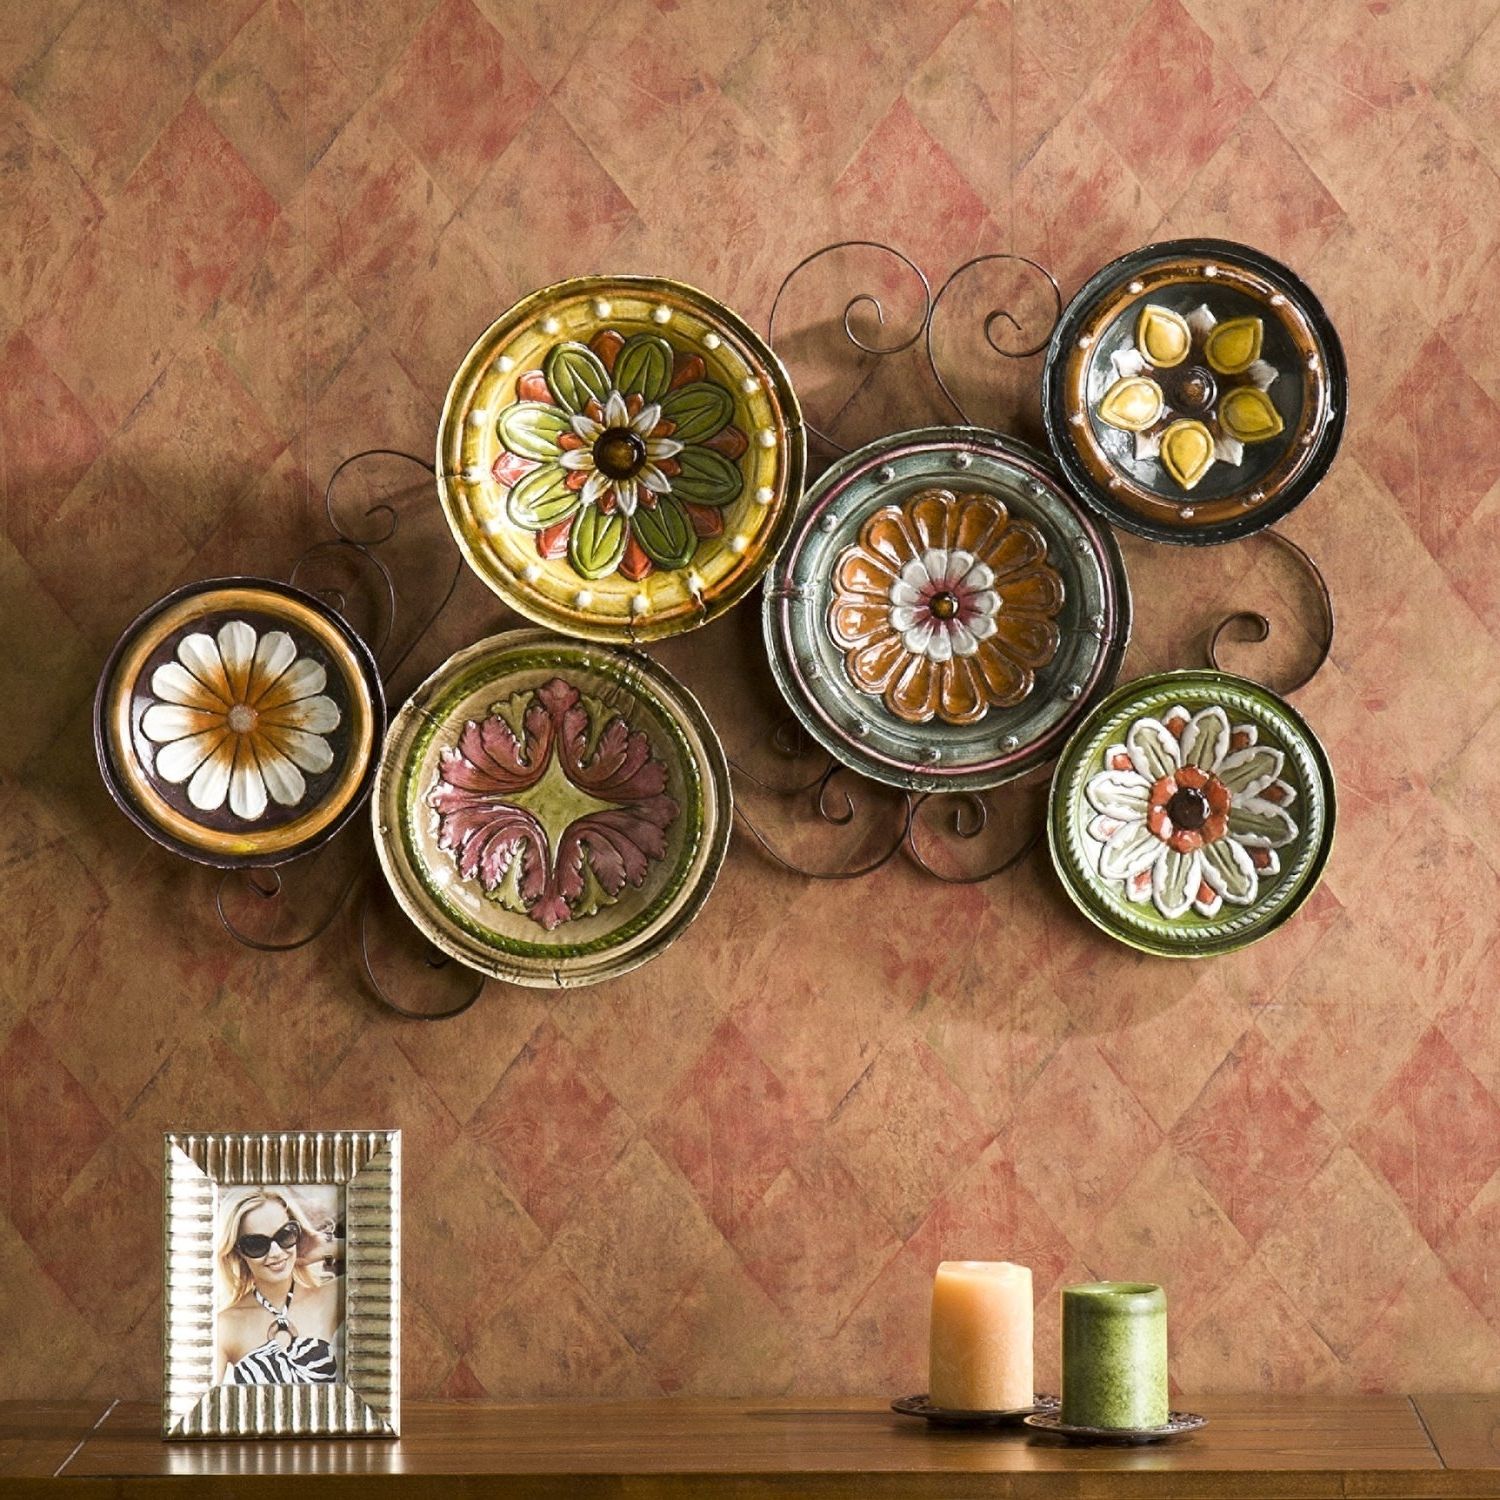 Most Popular Scattered Italian Plates Wall Art For Amazon: Scattered Italian Plates Wall Art: Home & Kitchen (View 2 of 15)